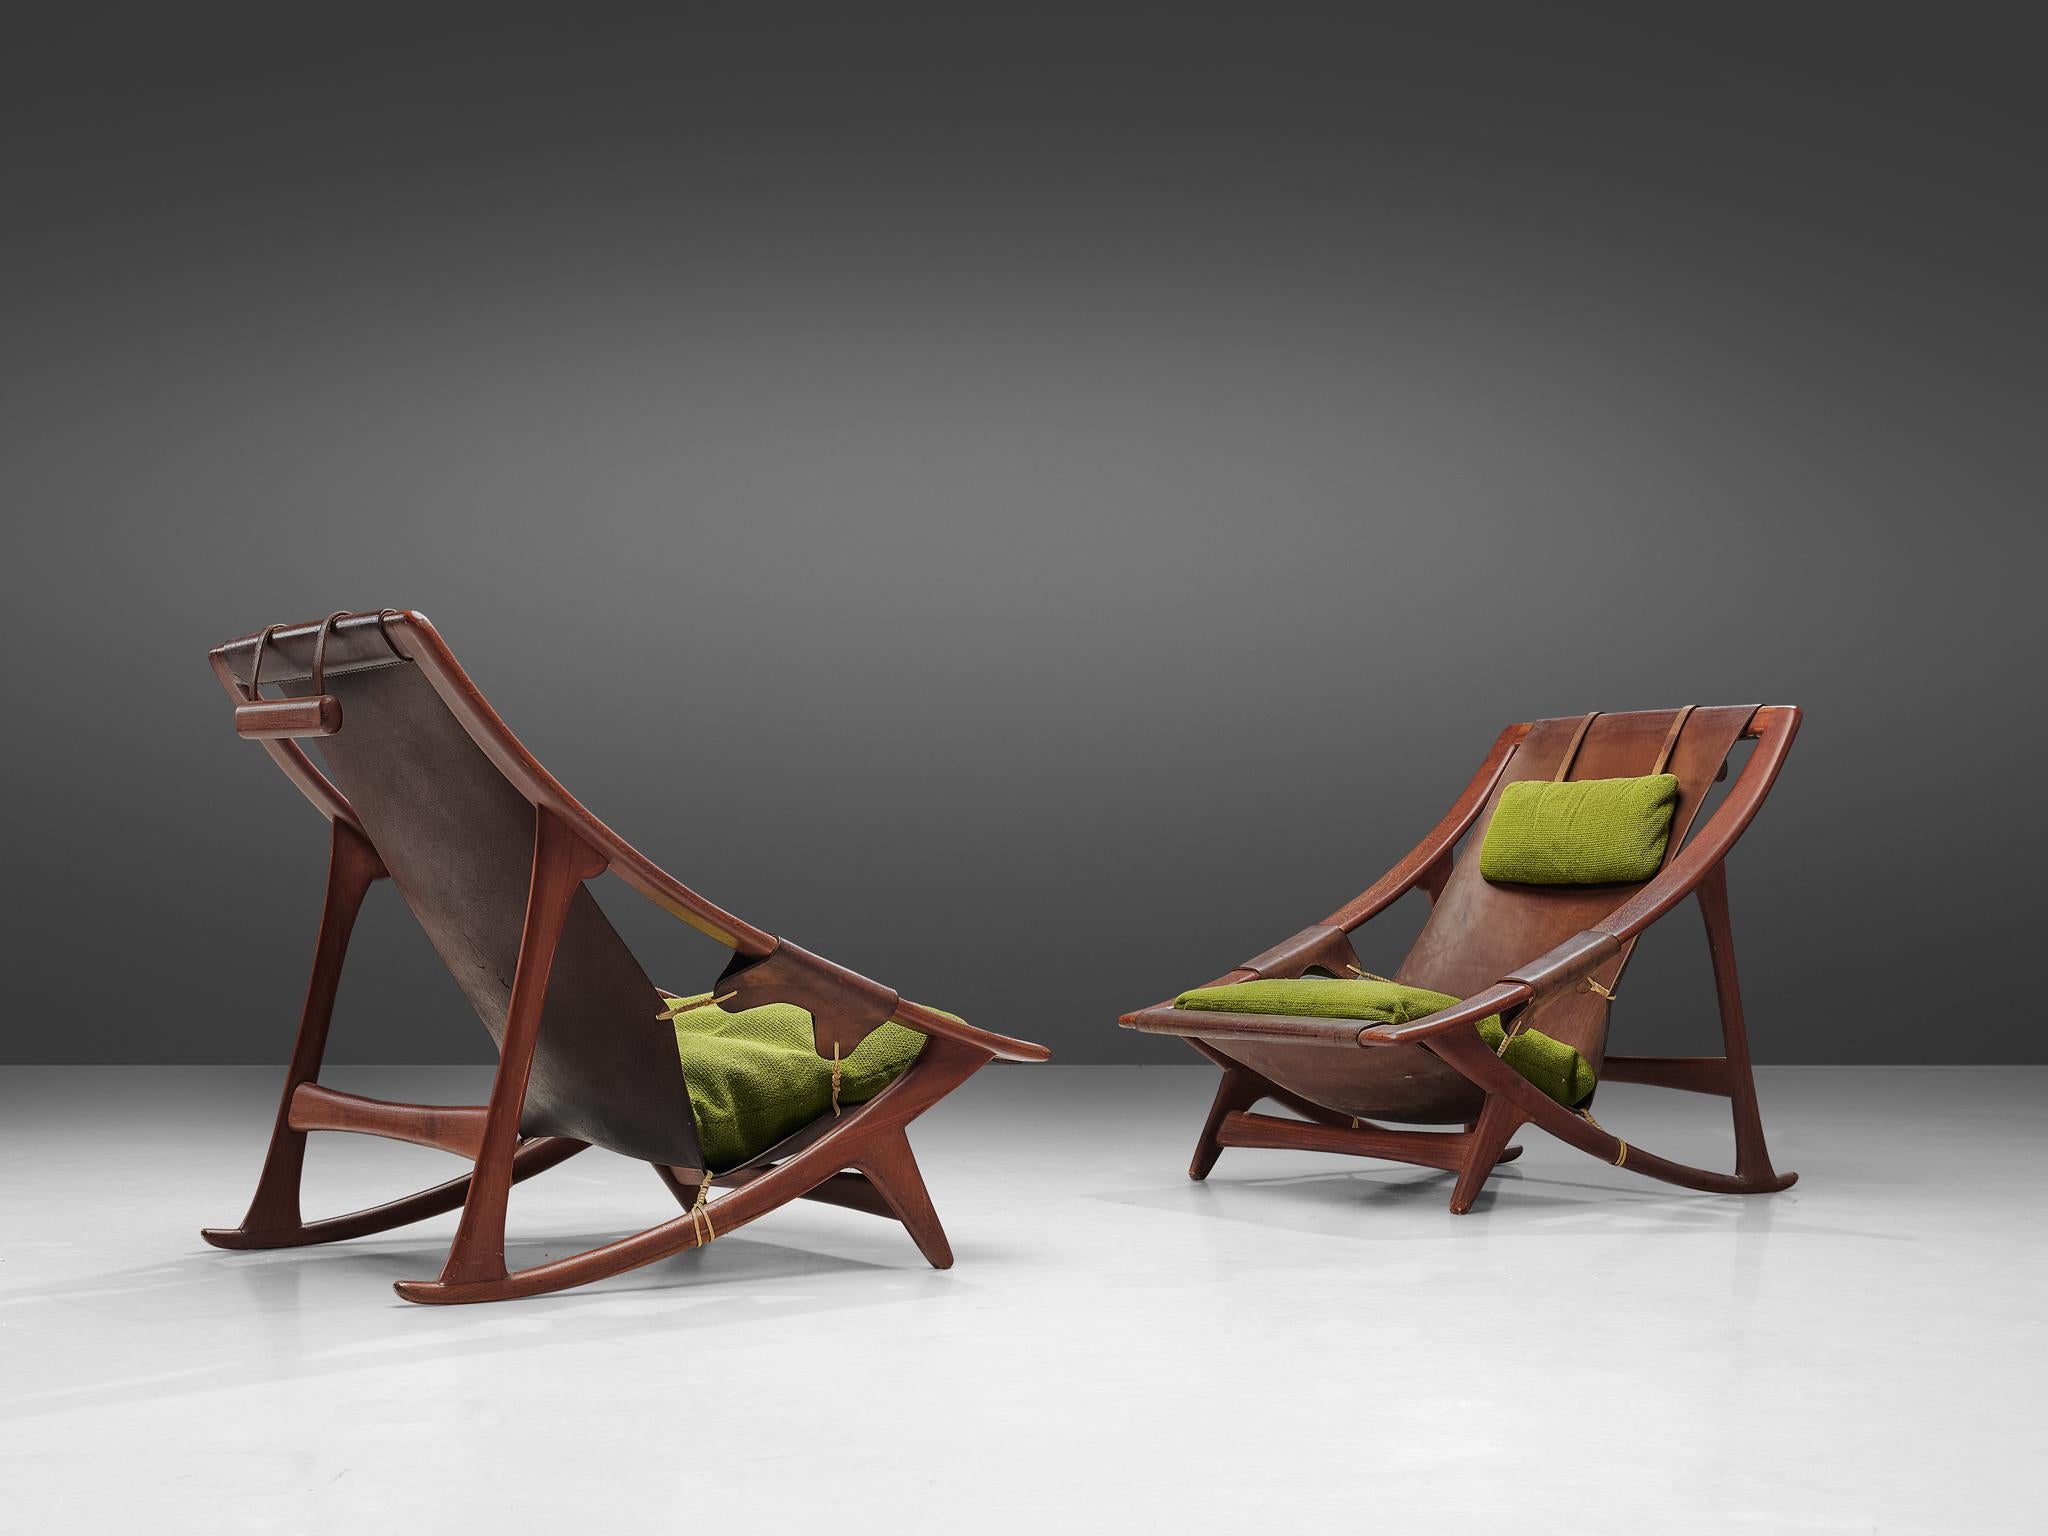 W. Andersag, set of 2 lounge chairs, teak, fabric and saddle leather, Italy, 1960s

These chairs are very dynamic due it's design and shapes. The teak frame shows beautiful lines. The frame and construction reminds of the sturdy hunting chairs.